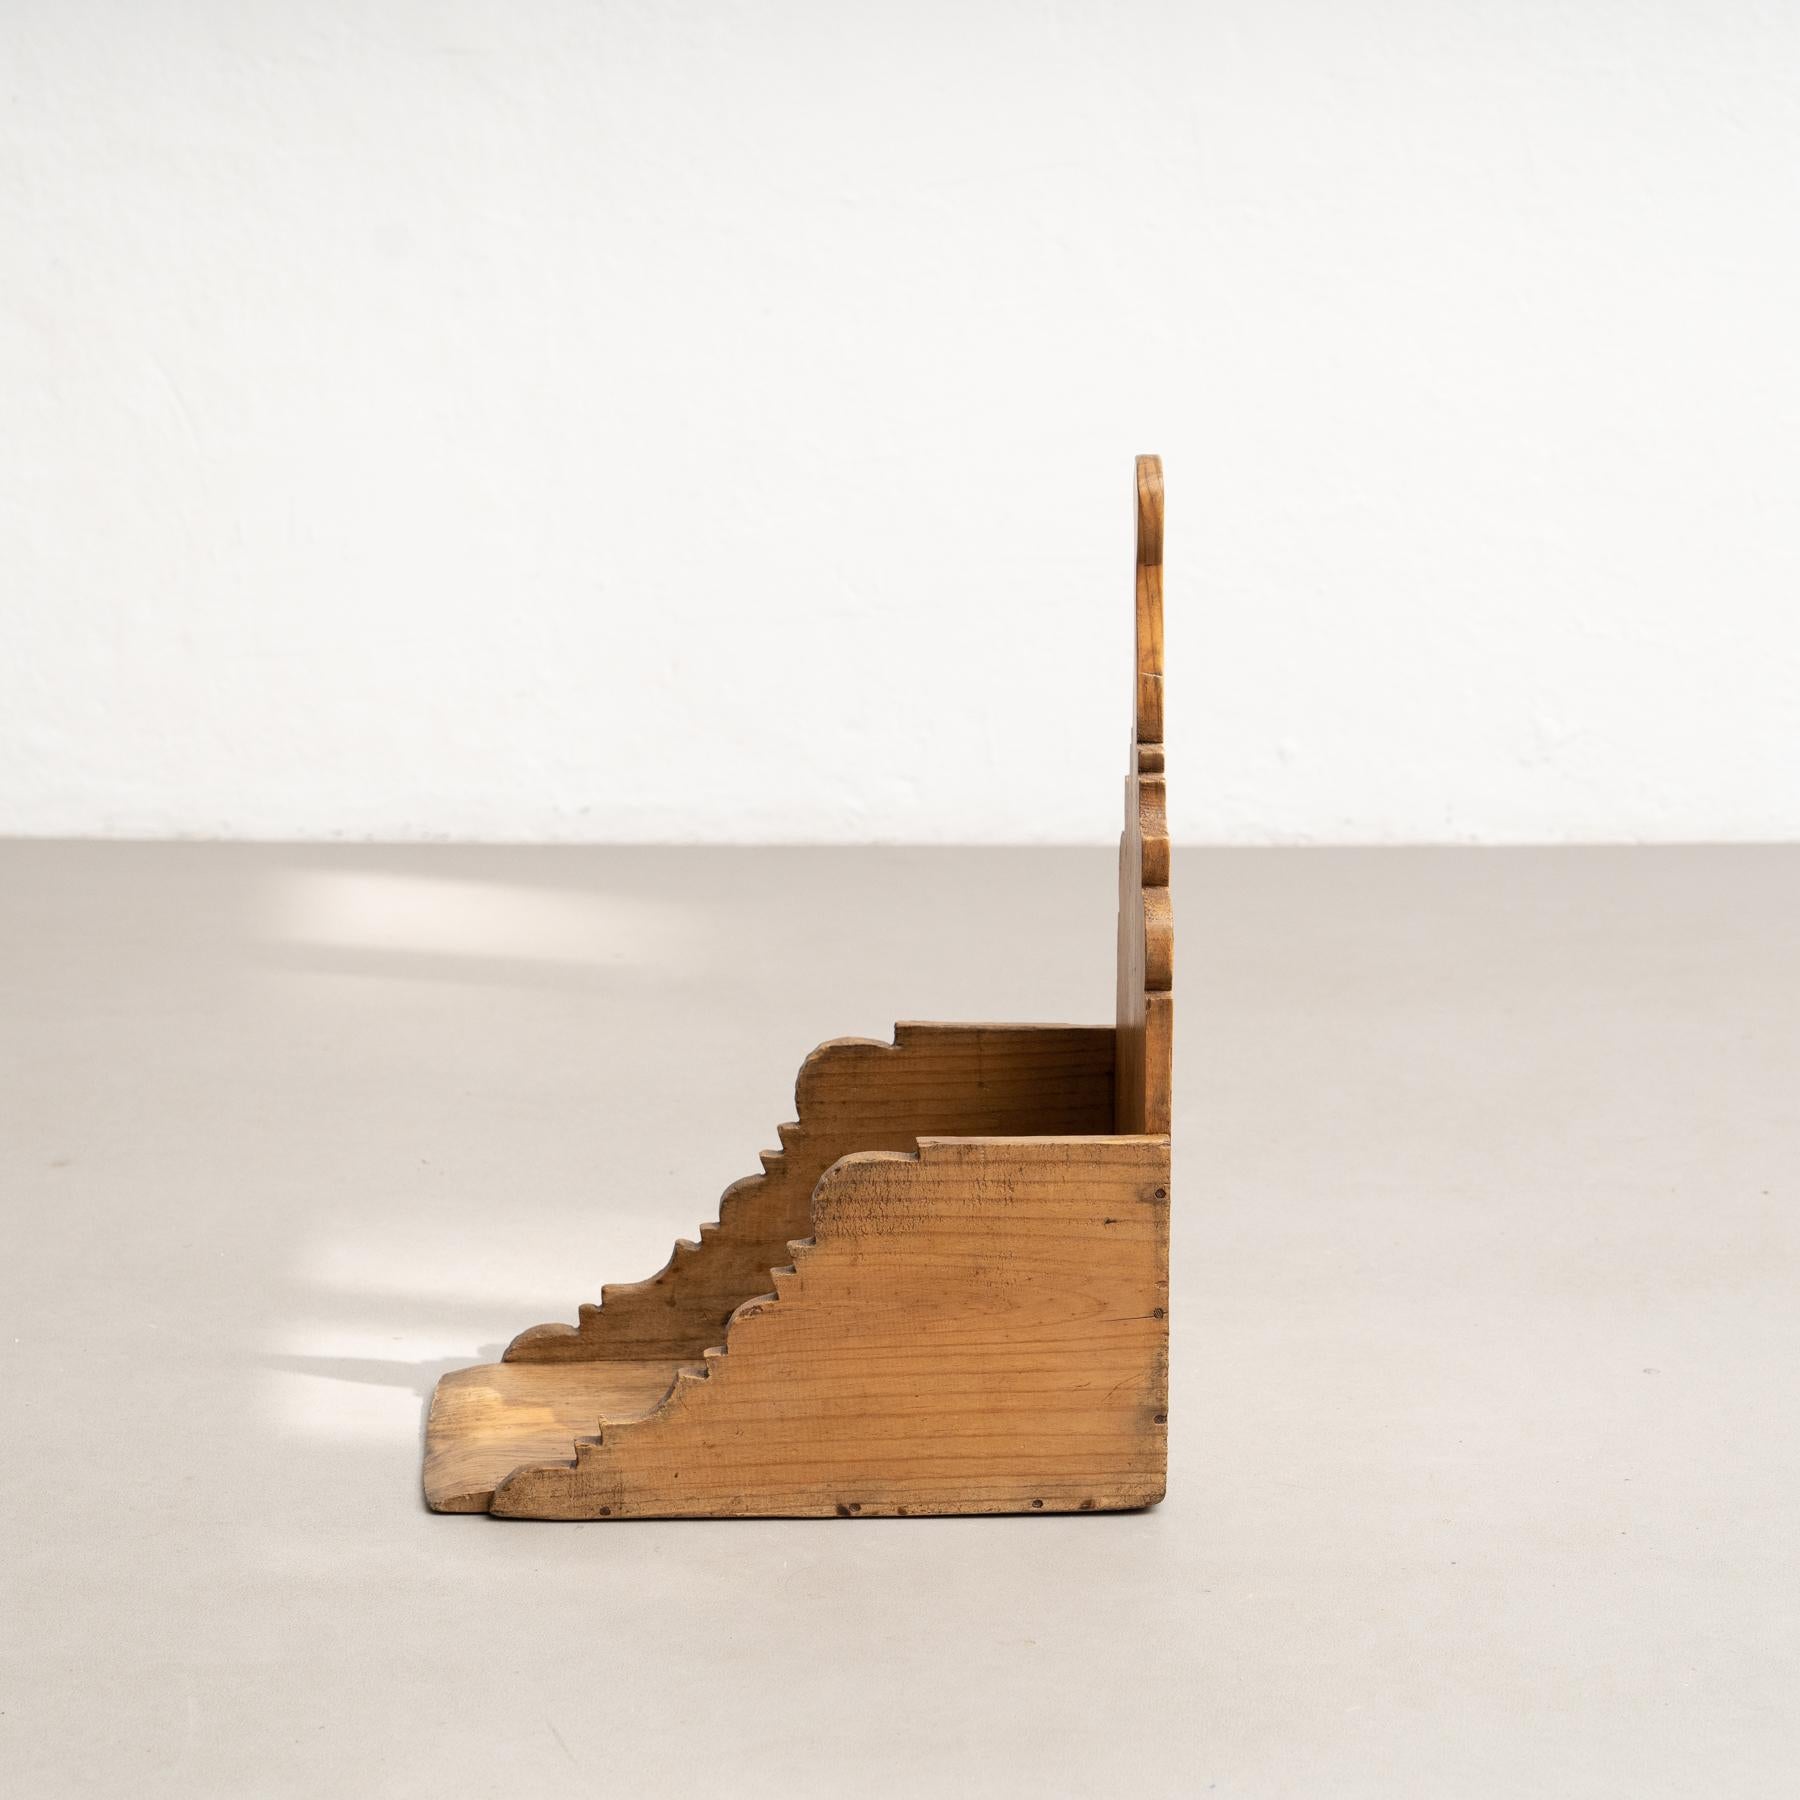 Early 20th Century Rustic Sculptural Wood Broom Dustpan In Good Condition For Sale In Barcelona, ES